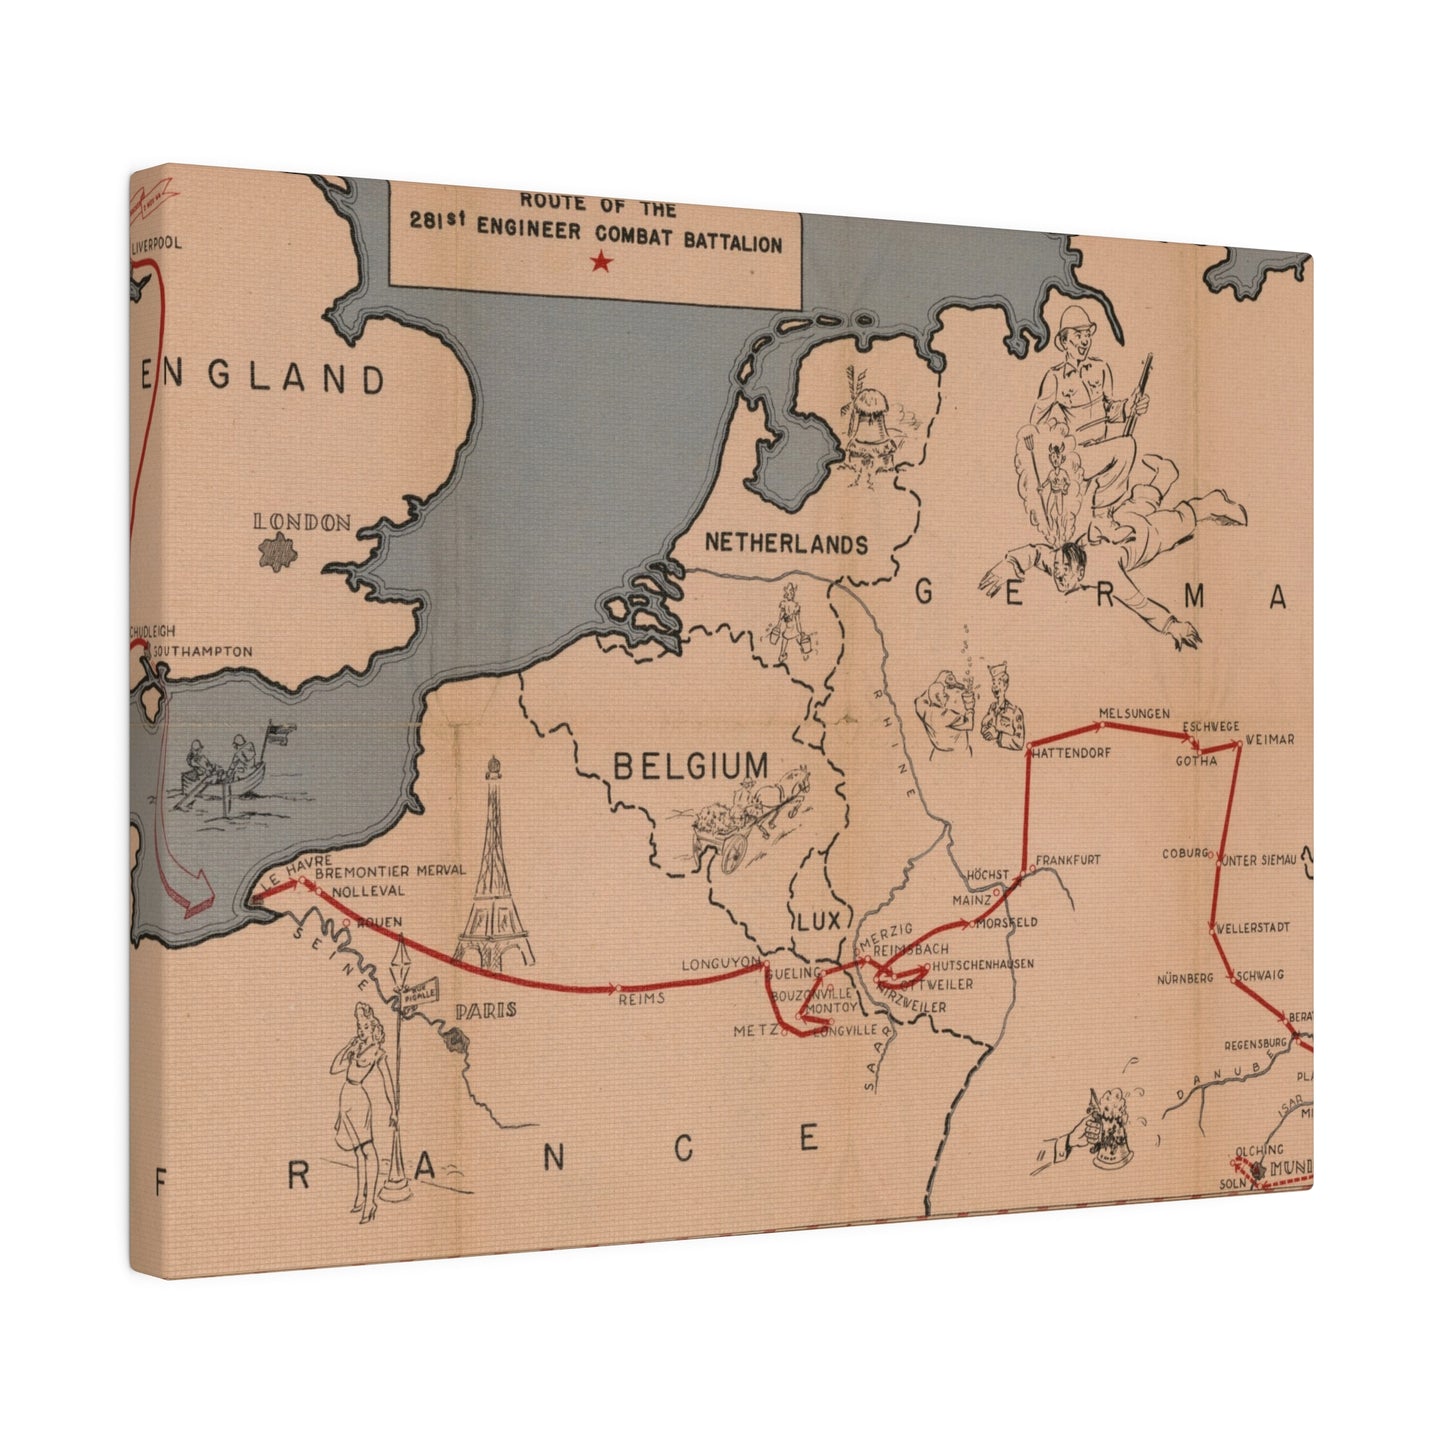 Route of the 281st Engineer Combat Battalion 3 November 1944 to 8 May 1945